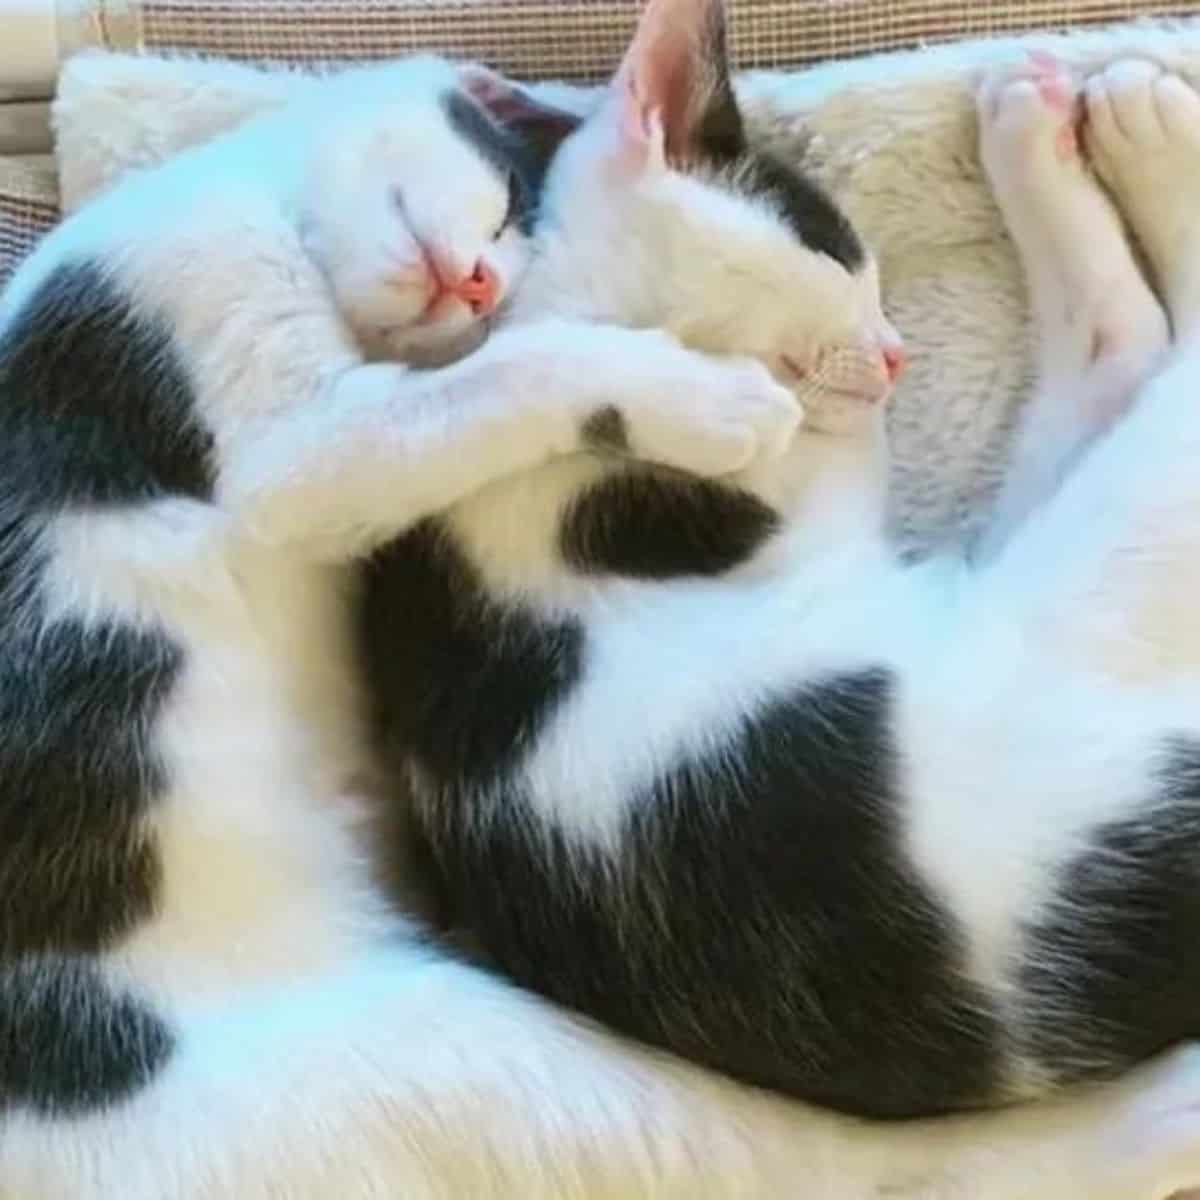 two cats are lying and sleeping in each other's arms